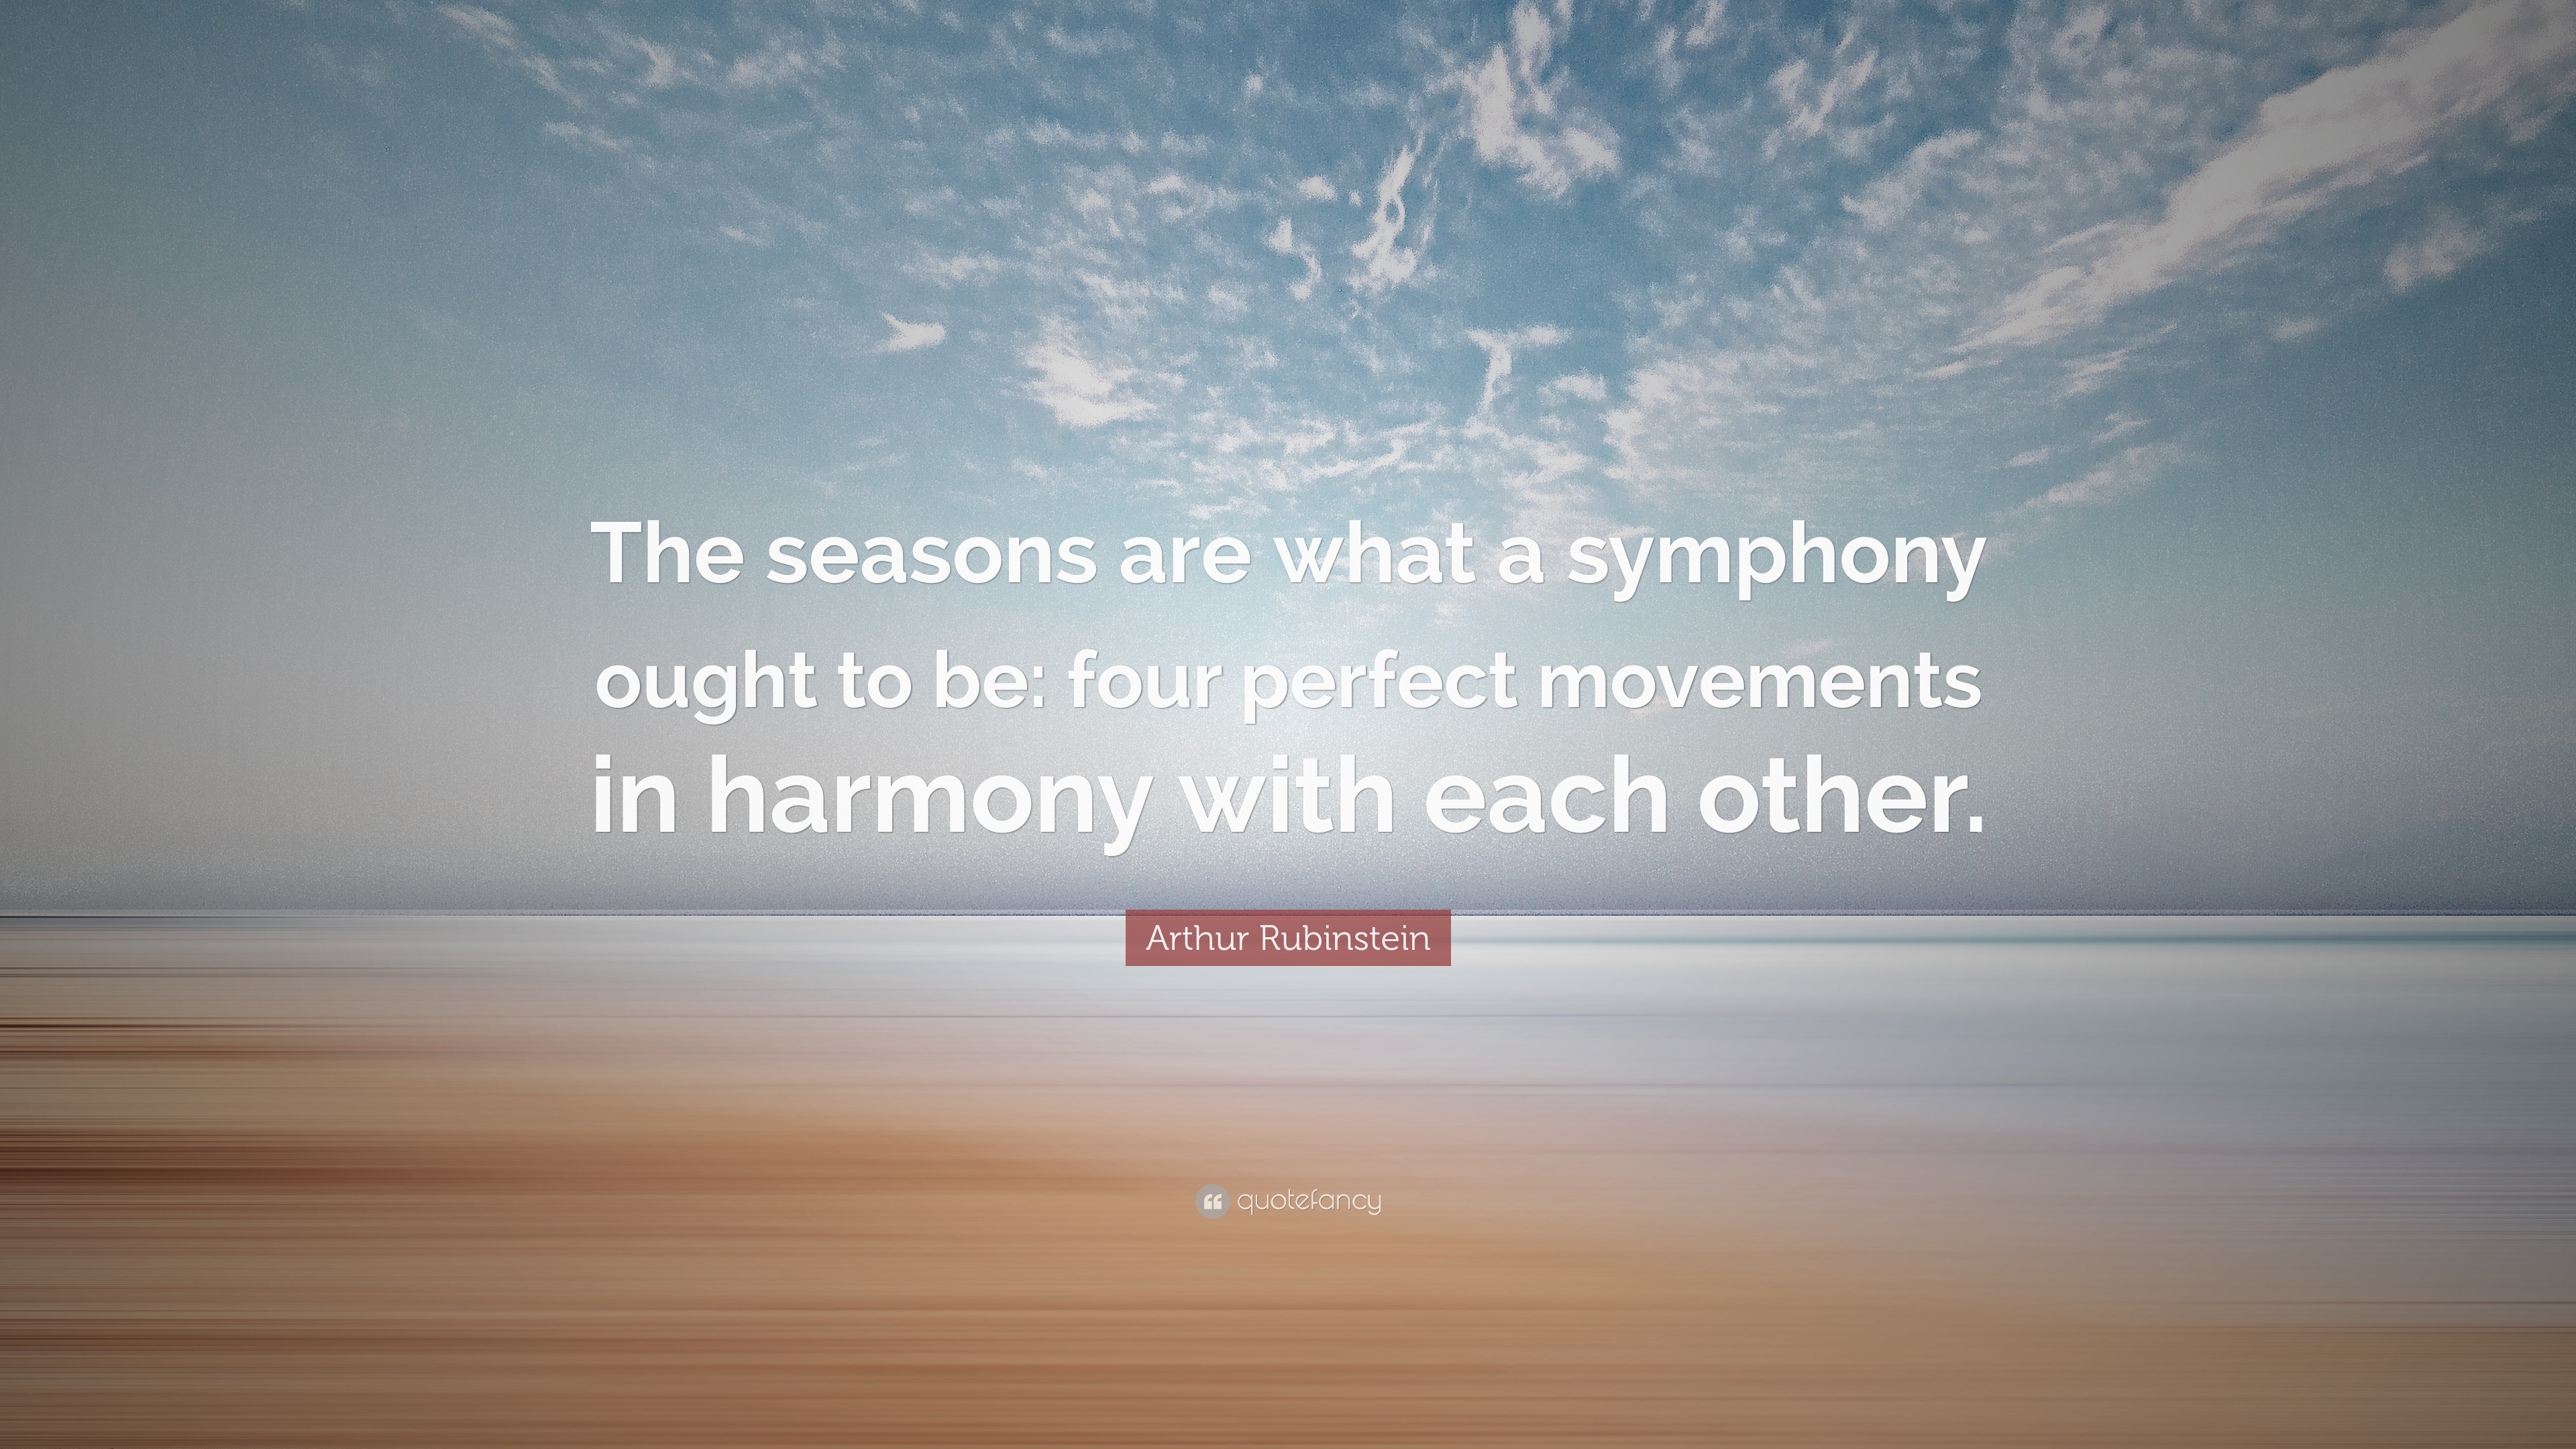 Arthur Rubinstein Quote: “The seasons are what a symphony ought to be